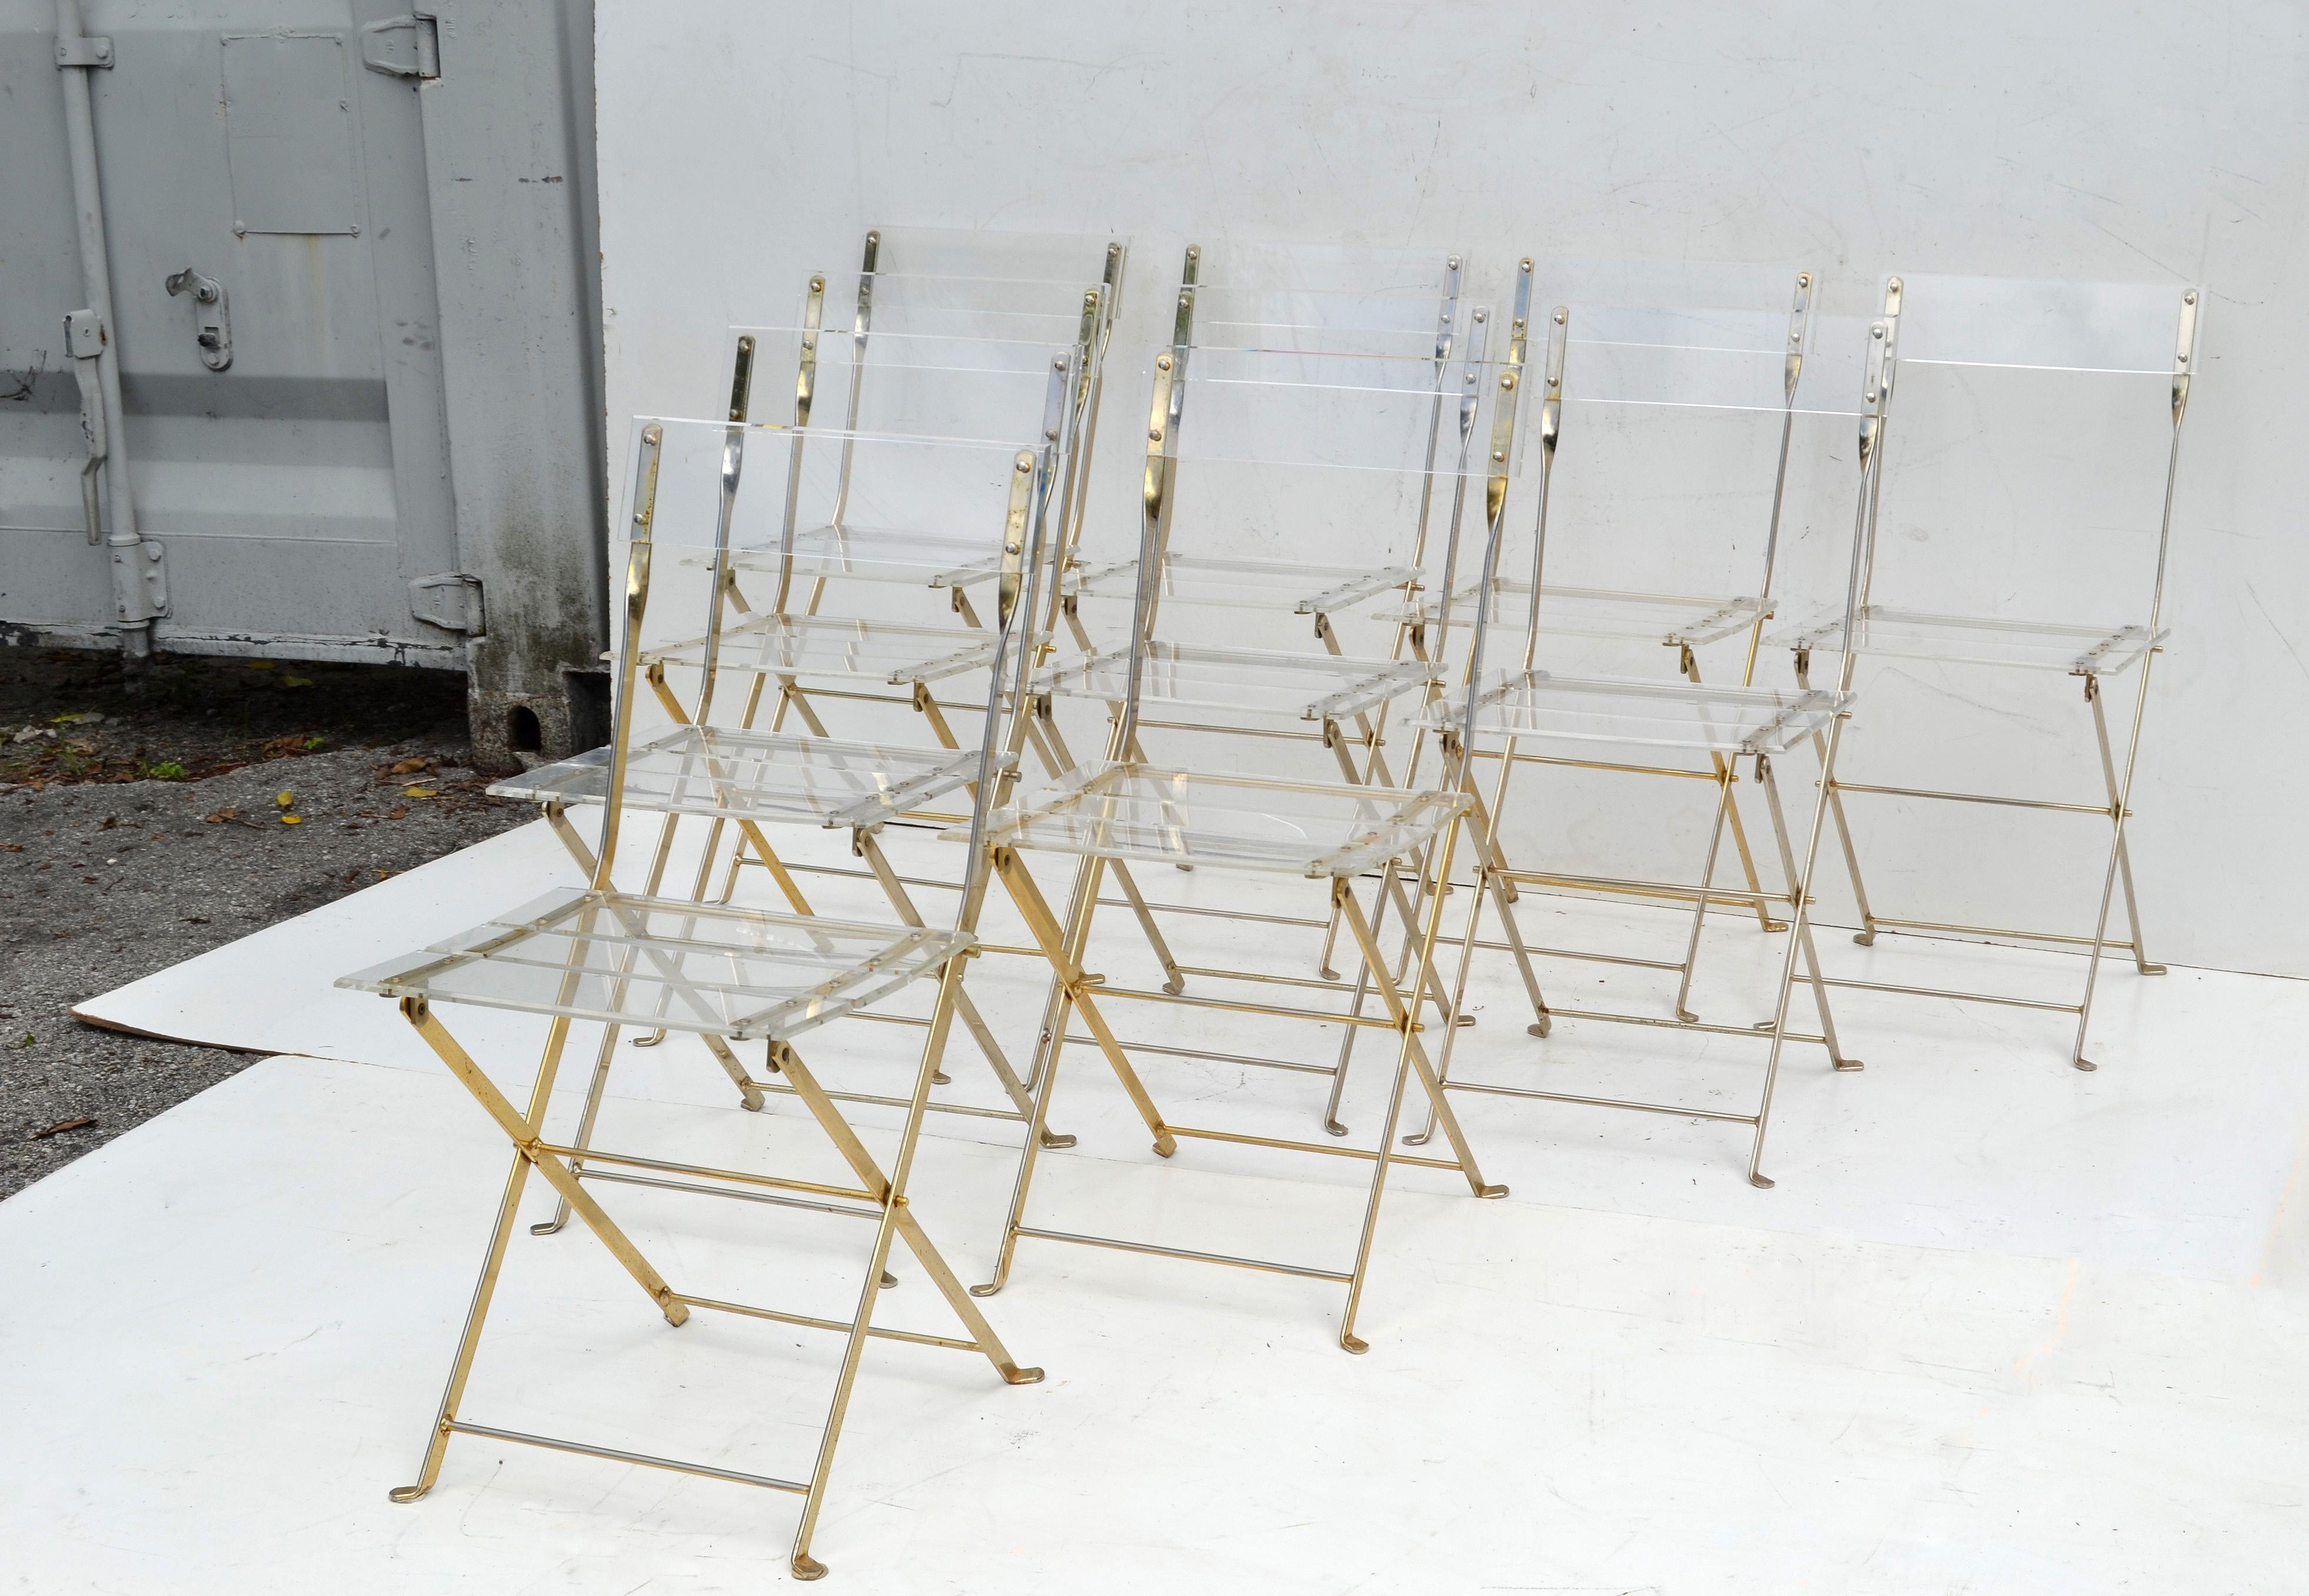 Plated Set of 10 Lucite Folding Chairs by Yonel Lebovici for Marais International 1970